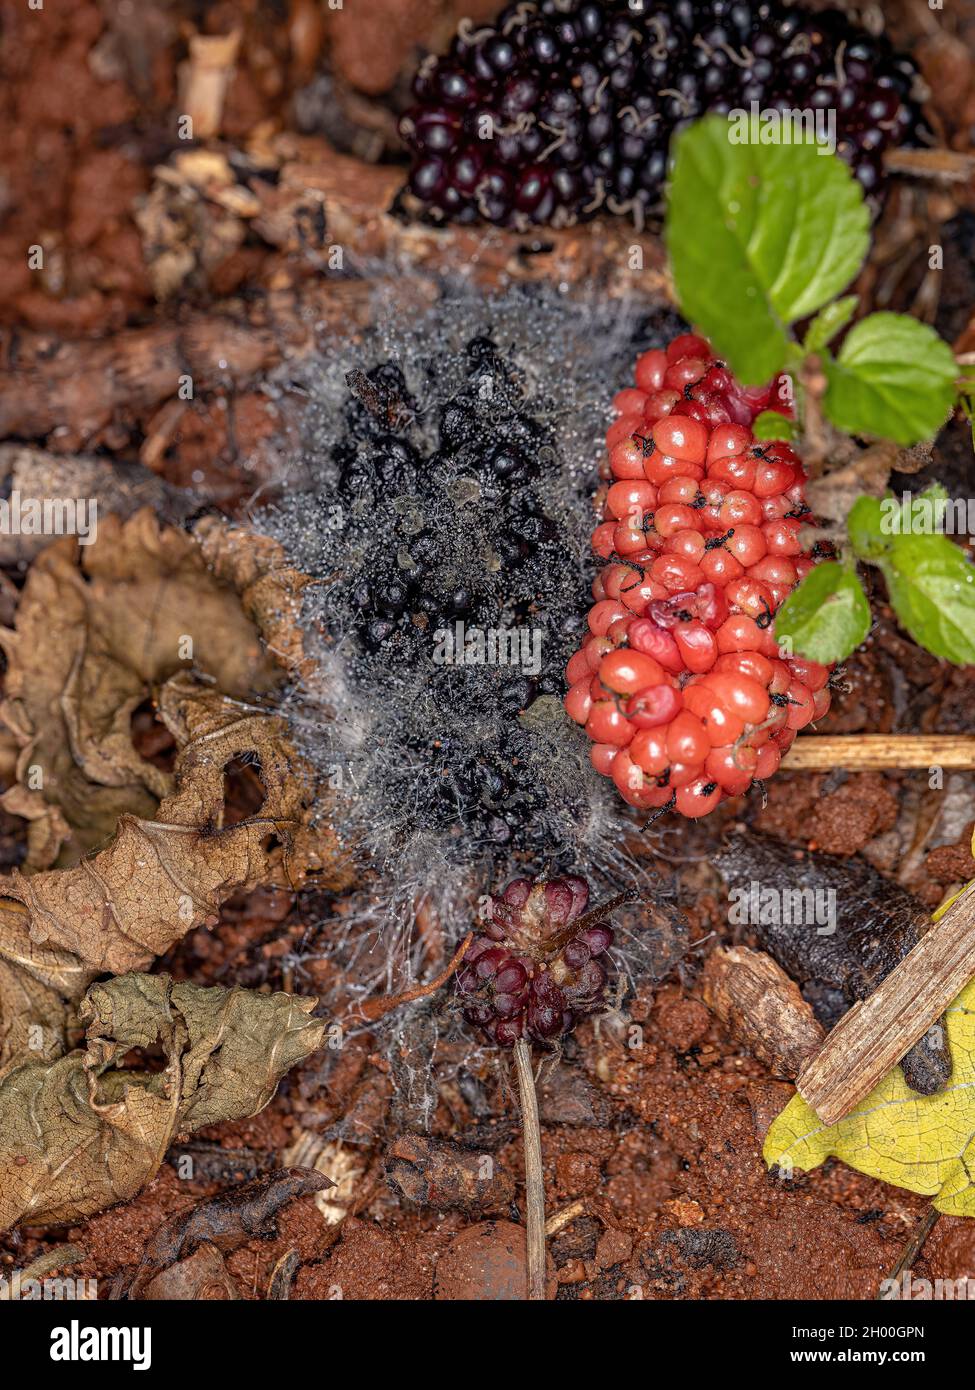 Ripe mulberry fruits fallen on the ground in a state of fungal decomposition Stock Photo